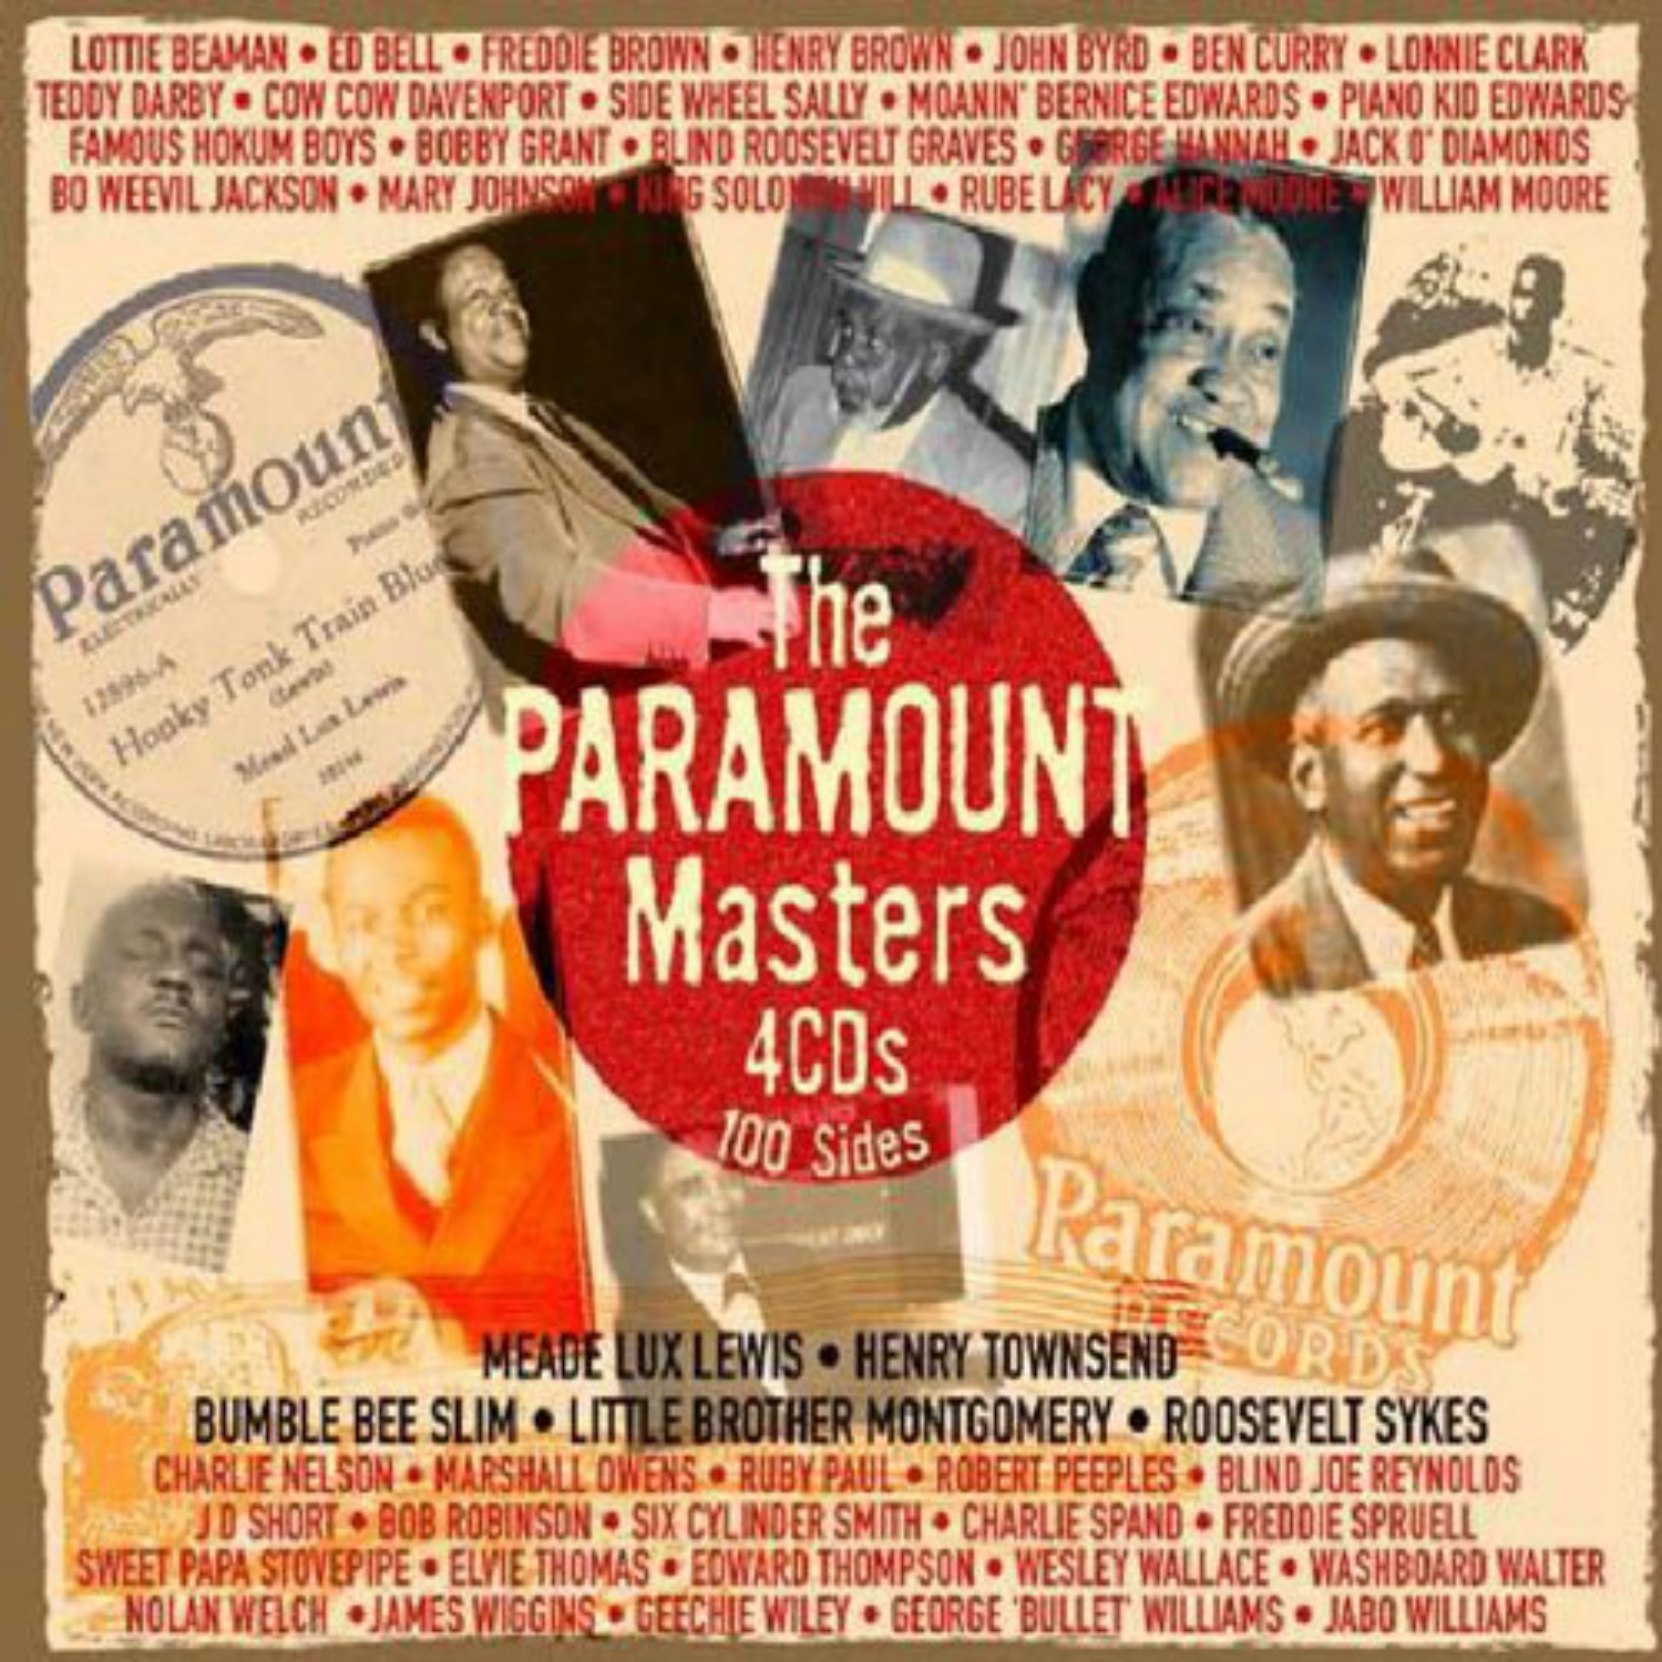 CD cover. The Paramount Masters, on JSP Records